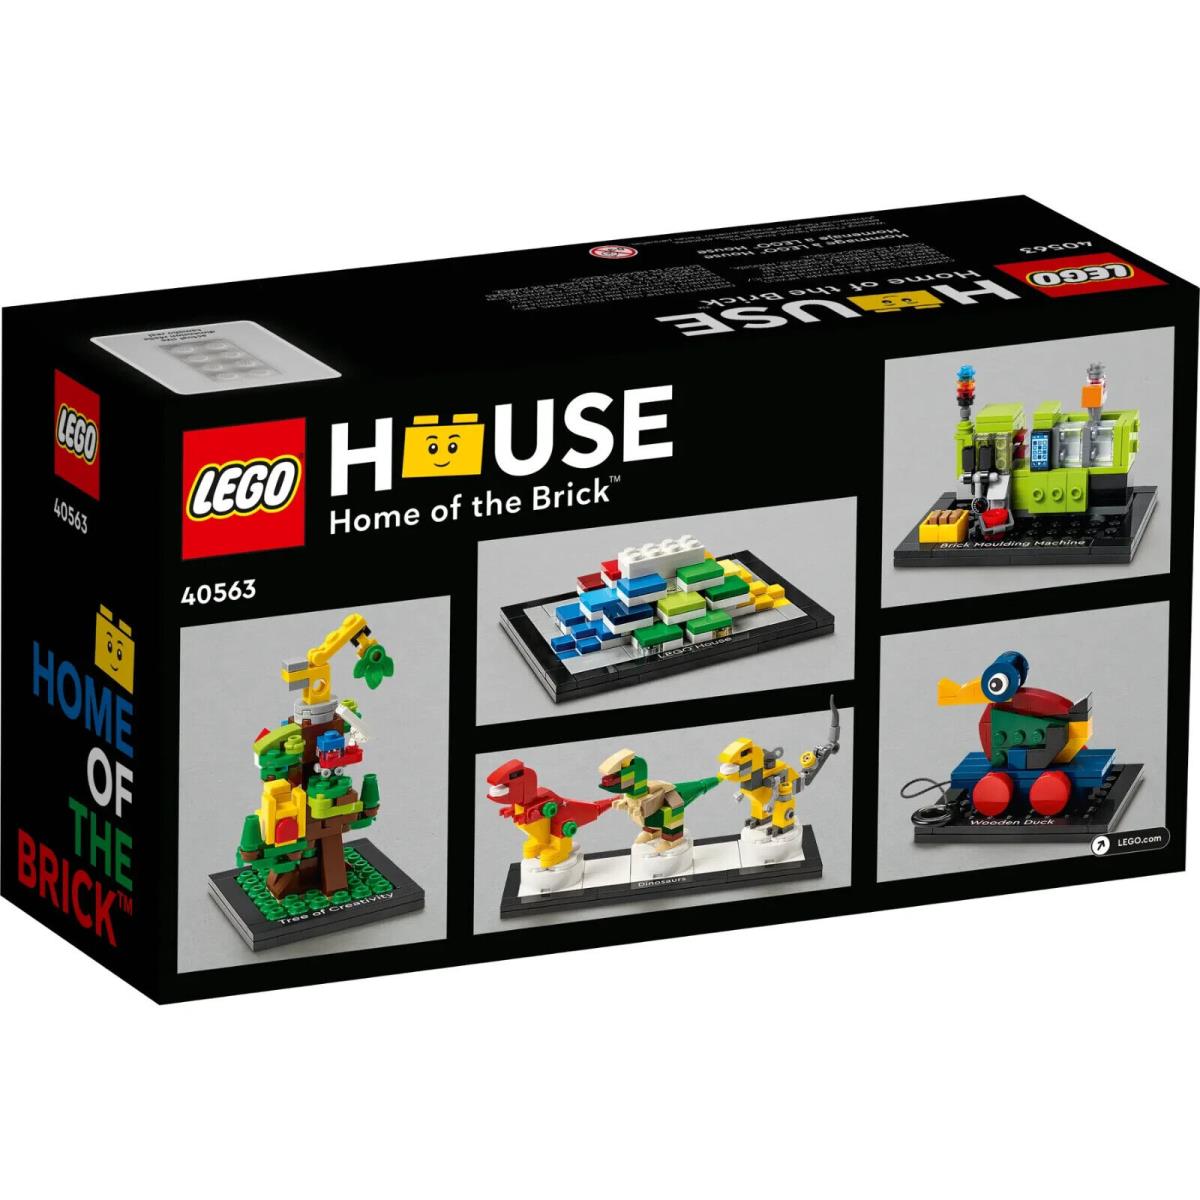 Limited Edition Lego Tribute to The Denmark Lego House 40563